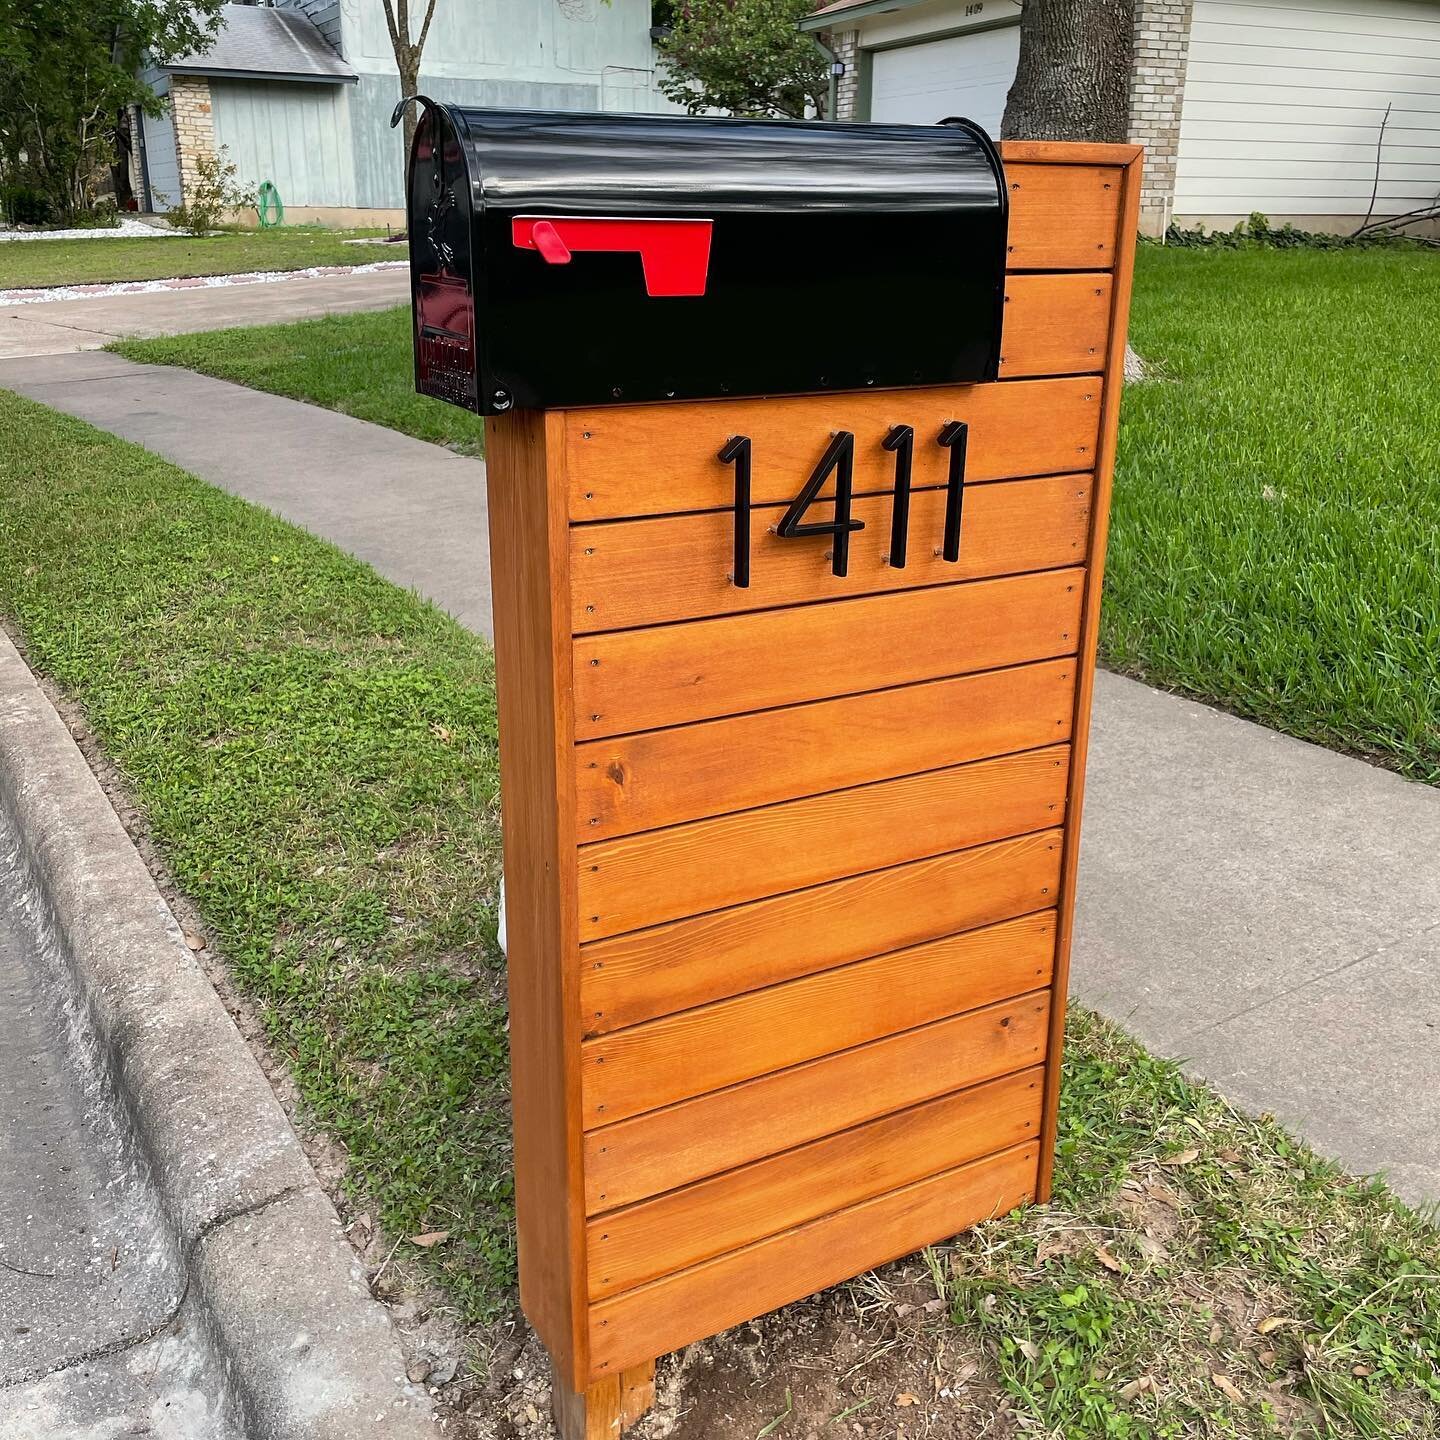 Another rescue job for an old mailbox literally falling over 🤘🏼💪🏼 

#ronsmailboxesdotcom
#curbappeal #hubbahubba #showstopper #mailboxenvy #mailbox #mailboxpost #saveusps #cedarfurniture #carpentryskills #newdesign